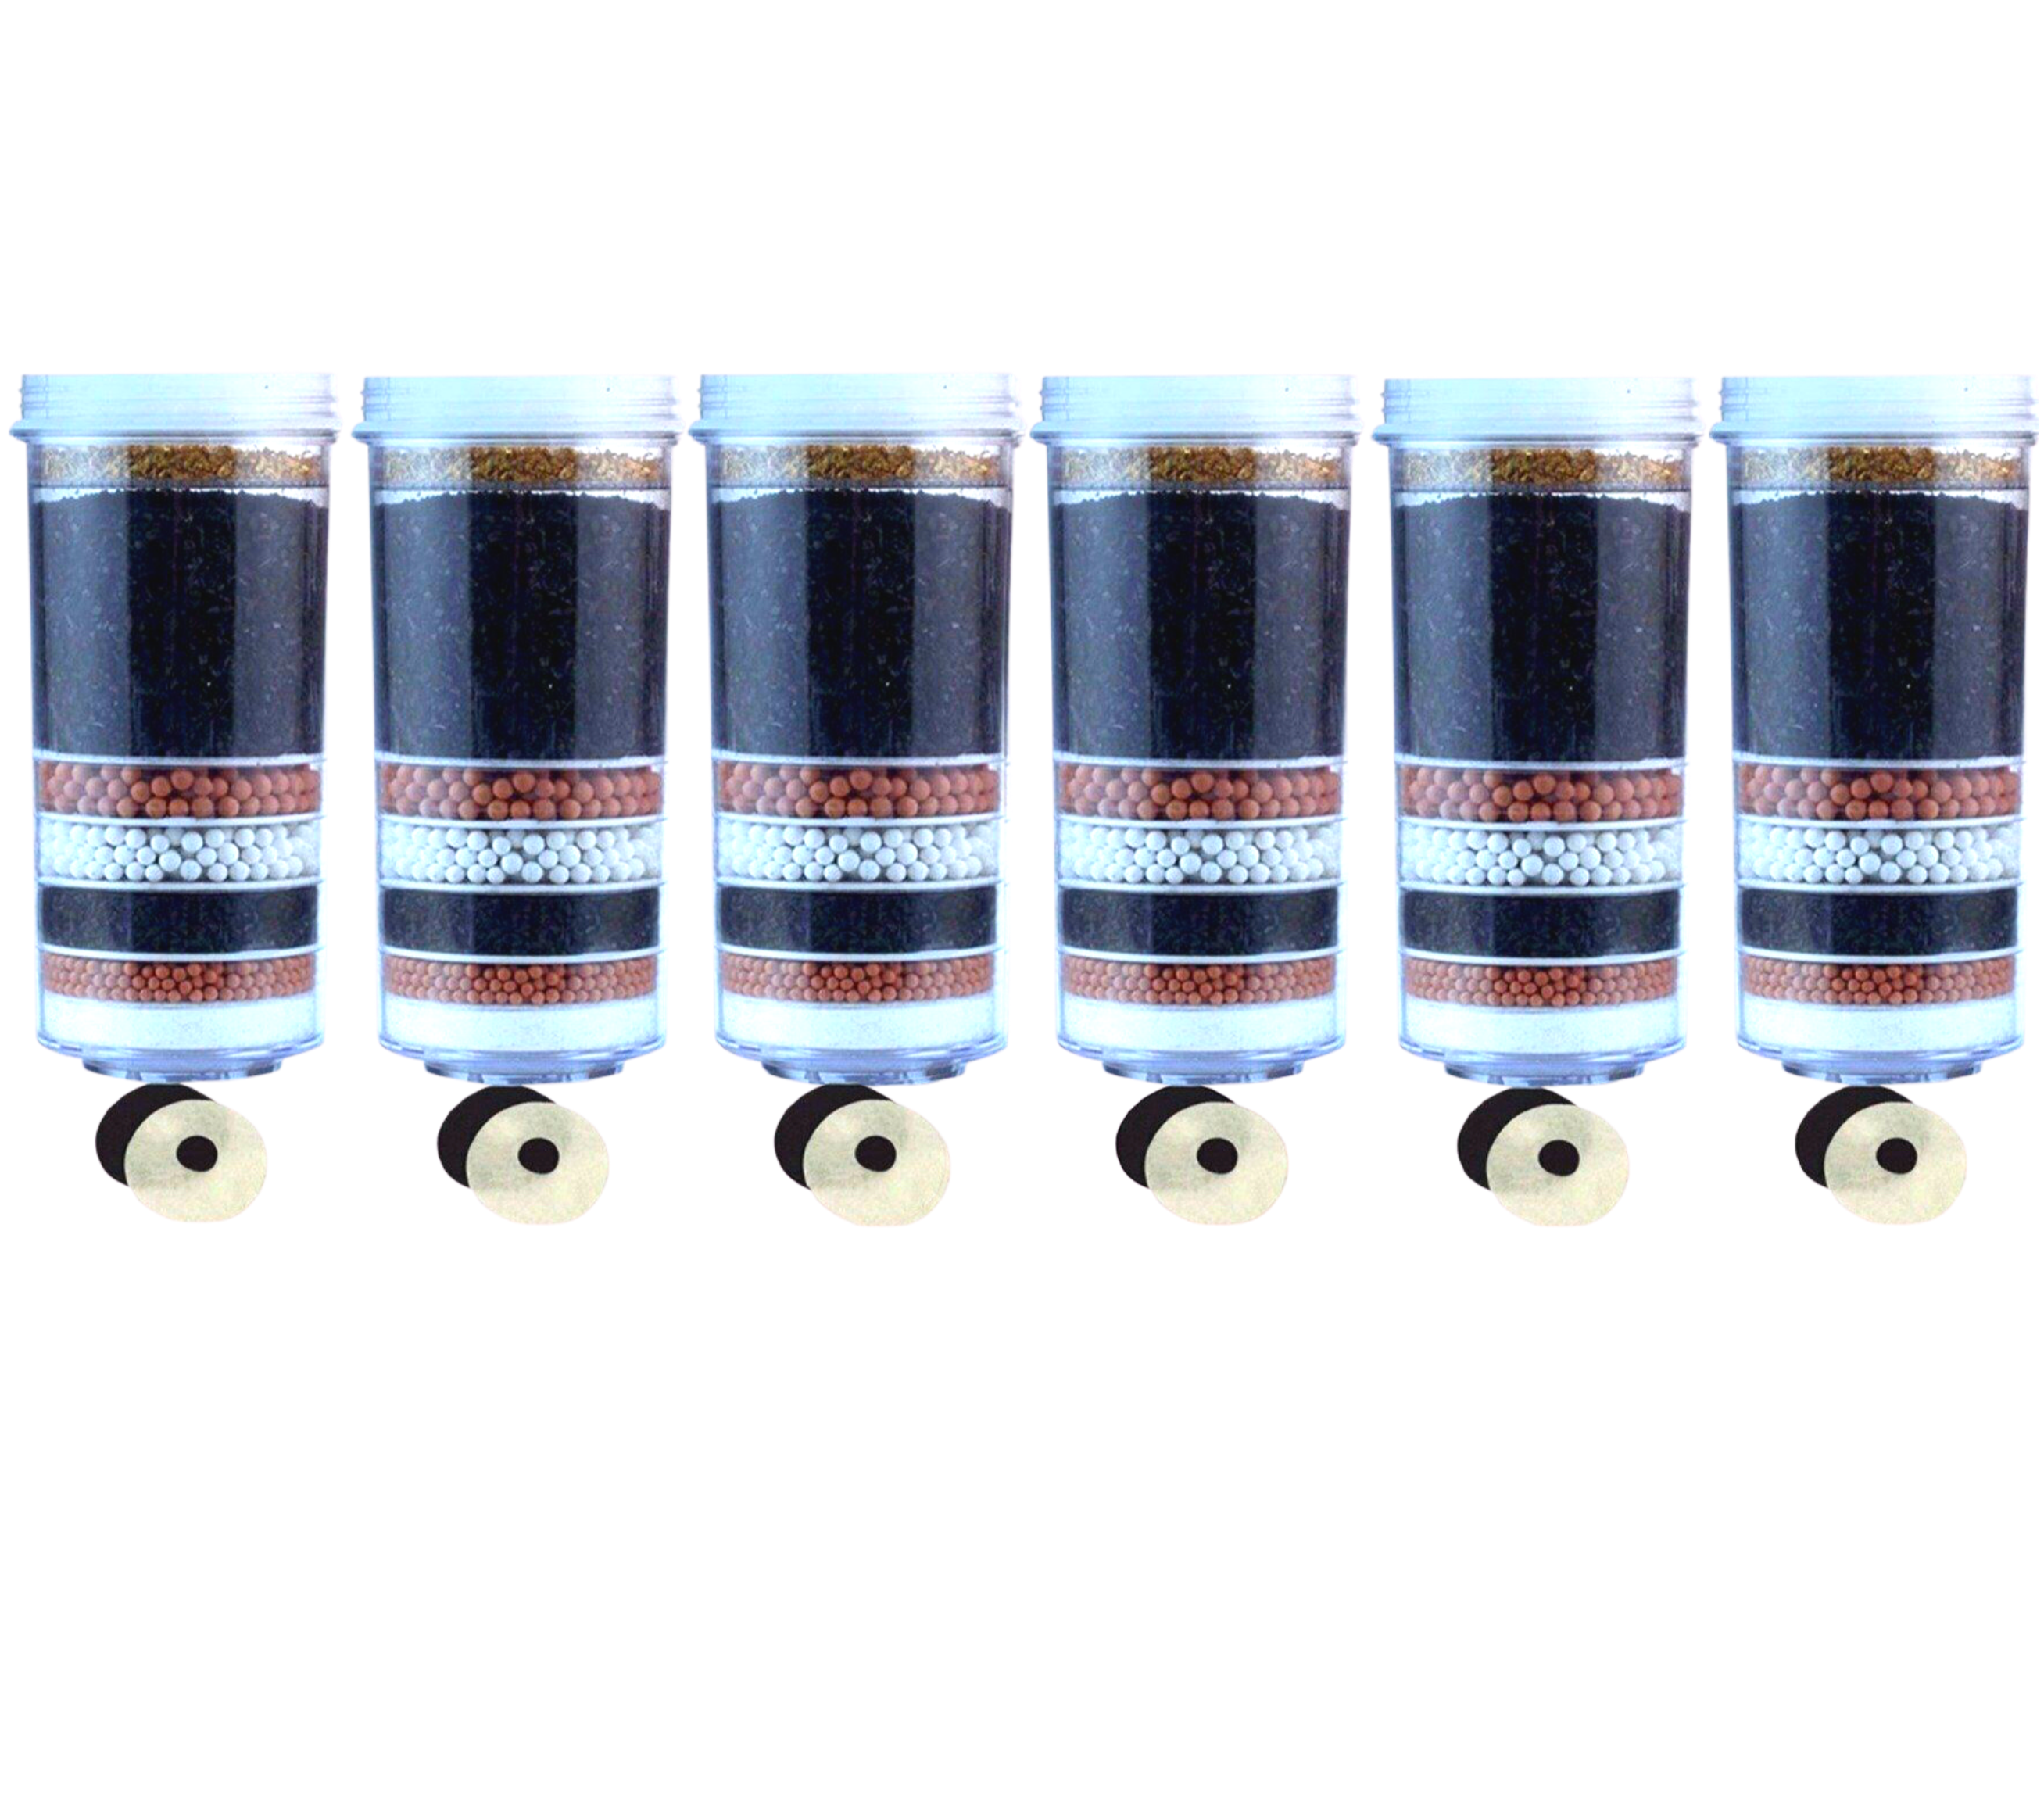 AIMEX 8 STAGE WATER FILTER CARTRIDGES X 6